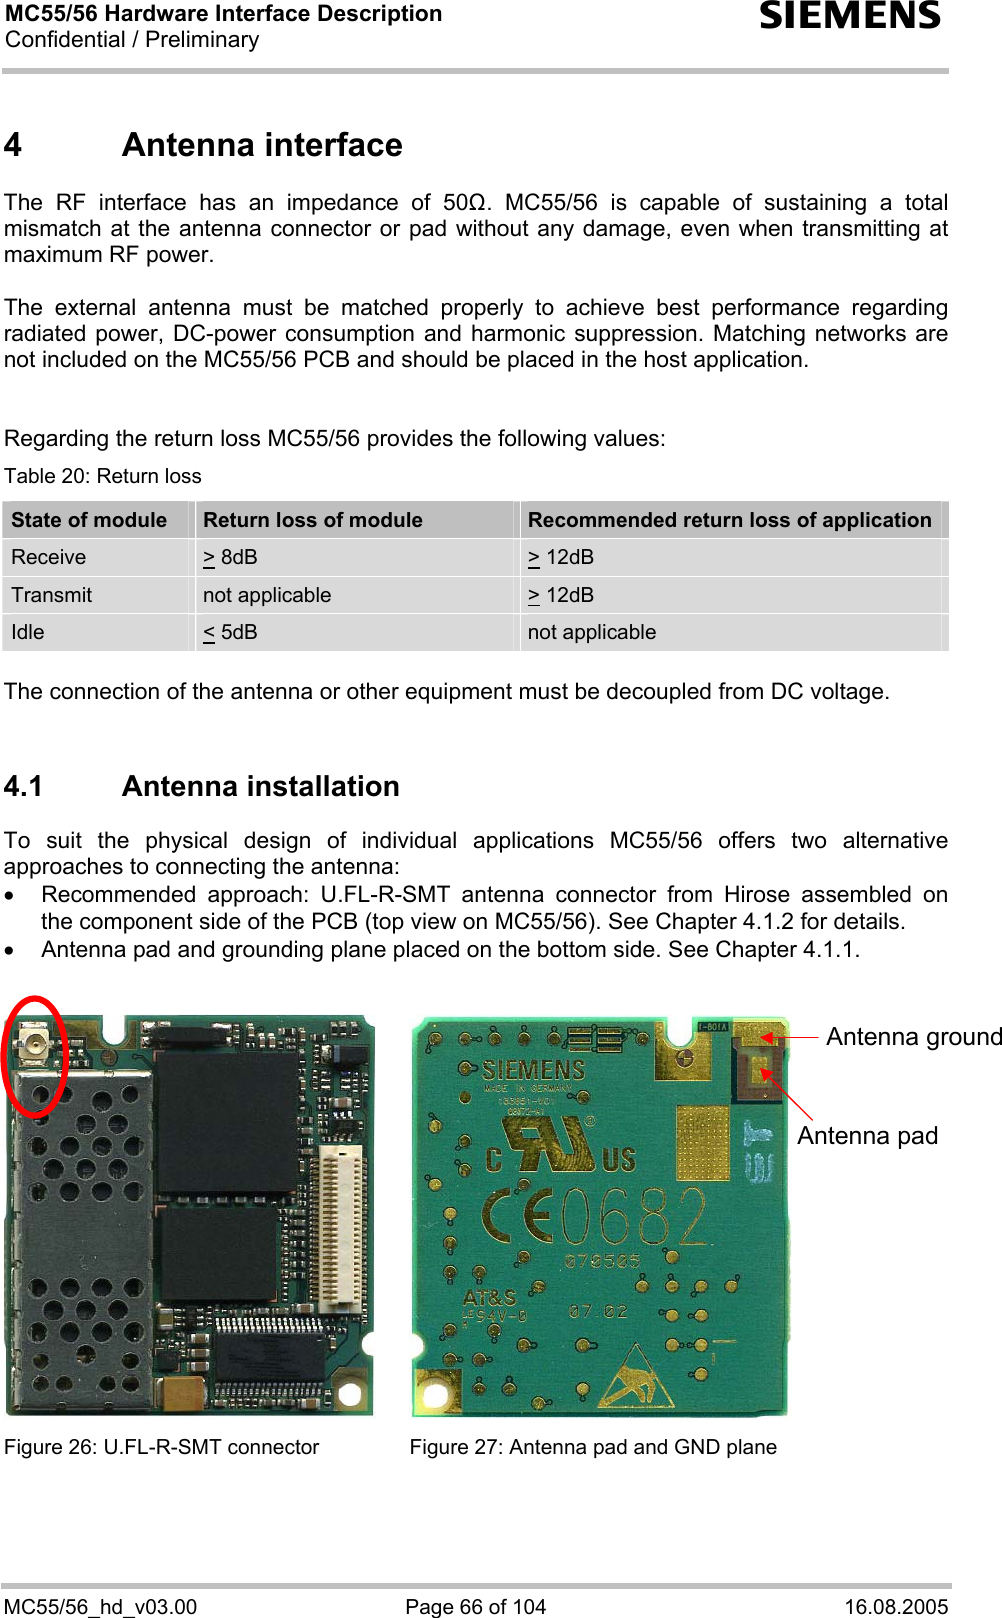 MC55/56 Hardware Interface Description Confidential / Preliminary s MC55/56_hd_v03.00  Page 66 of 104  16.08.2005 4 Antenna interface The RF interface has an impedance of 50. MC55/56 is capable of sustaining a total mismatch at the antenna connector or pad without any damage, even when transmitting at maximum RF power.   The external antenna must be matched properly to achieve best performance regarding radiated power, DC-power consumption and harmonic suppression. Matching networks are not included on the MC55/56 PCB and should be placed in the host application.    Regarding the return loss MC55/56 provides the following values: Table 20: Return loss State of module  Return loss of module  Recommended return loss of application Receive  &gt; 8dB  &gt; 12dB  Transmit   not applicable   &gt; 12dB  Idle  &lt; 5dB   not applicable  The connection of the antenna or other equipment must be decoupled from DC voltage.  4.1 Antenna installation To suit the physical design of individual applications MC55/56 offers two alternative approaches to connecting the antenna:  •  Recommended approach: U.FL-R-SMT antenna connector from Hirose assembled on the component side of the PCB (top view on MC55/56). See Chapter 4.1.2 for details. •  Antenna pad and grounding plane placed on the bottom side. See Chapter 4.1.1.     Figure 26: U.FL-R-SMT connector  Figure 27: Antenna pad and GND plane   Antenna pad Antenna ground 